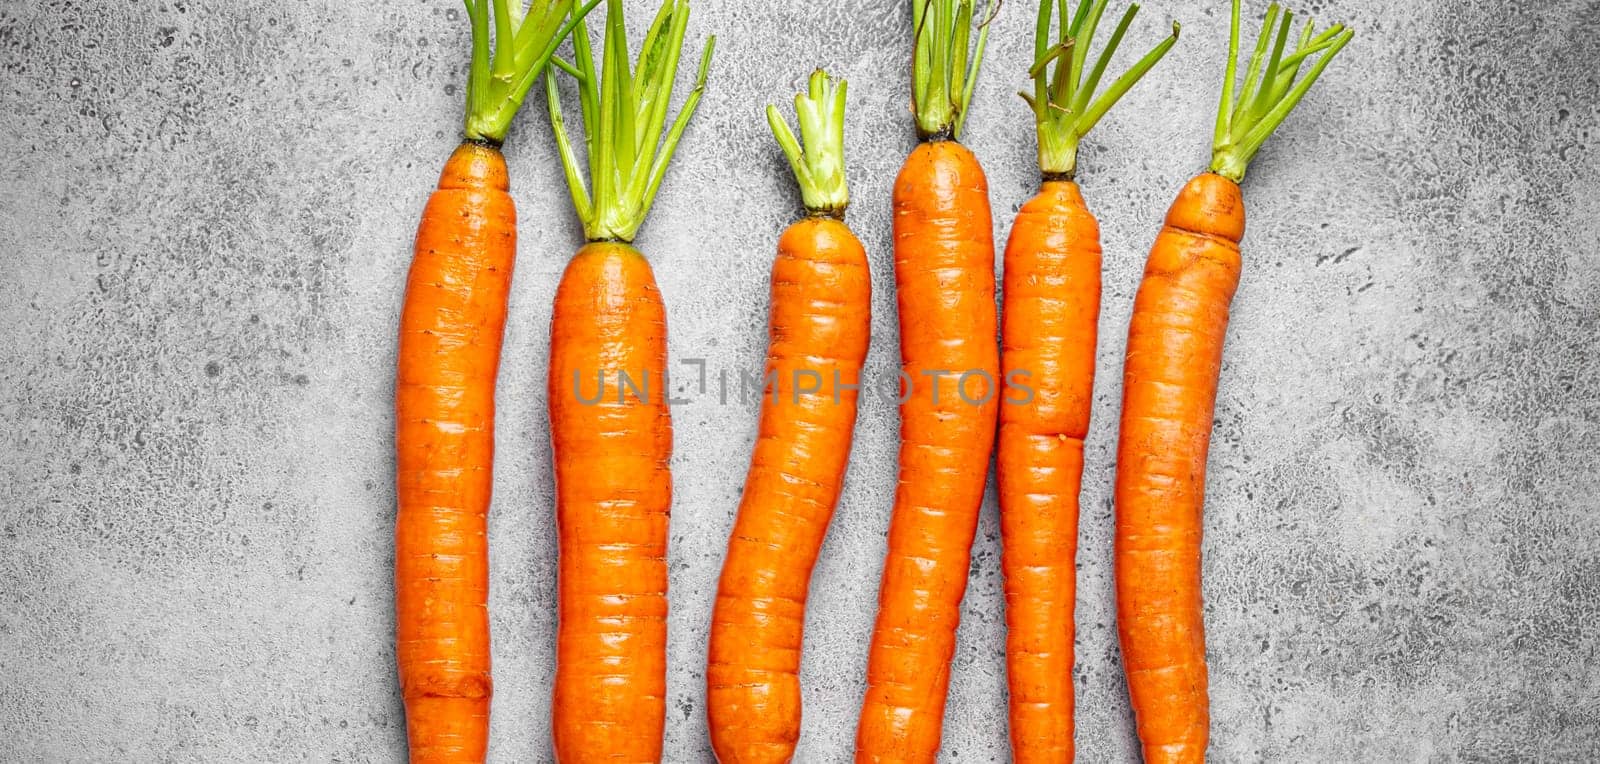 Fresh raw organic farm carrots with leafs arranged on grey rustic stone background top view, healthy carrots in balanced nutrition and cooking concept by its_al_dente